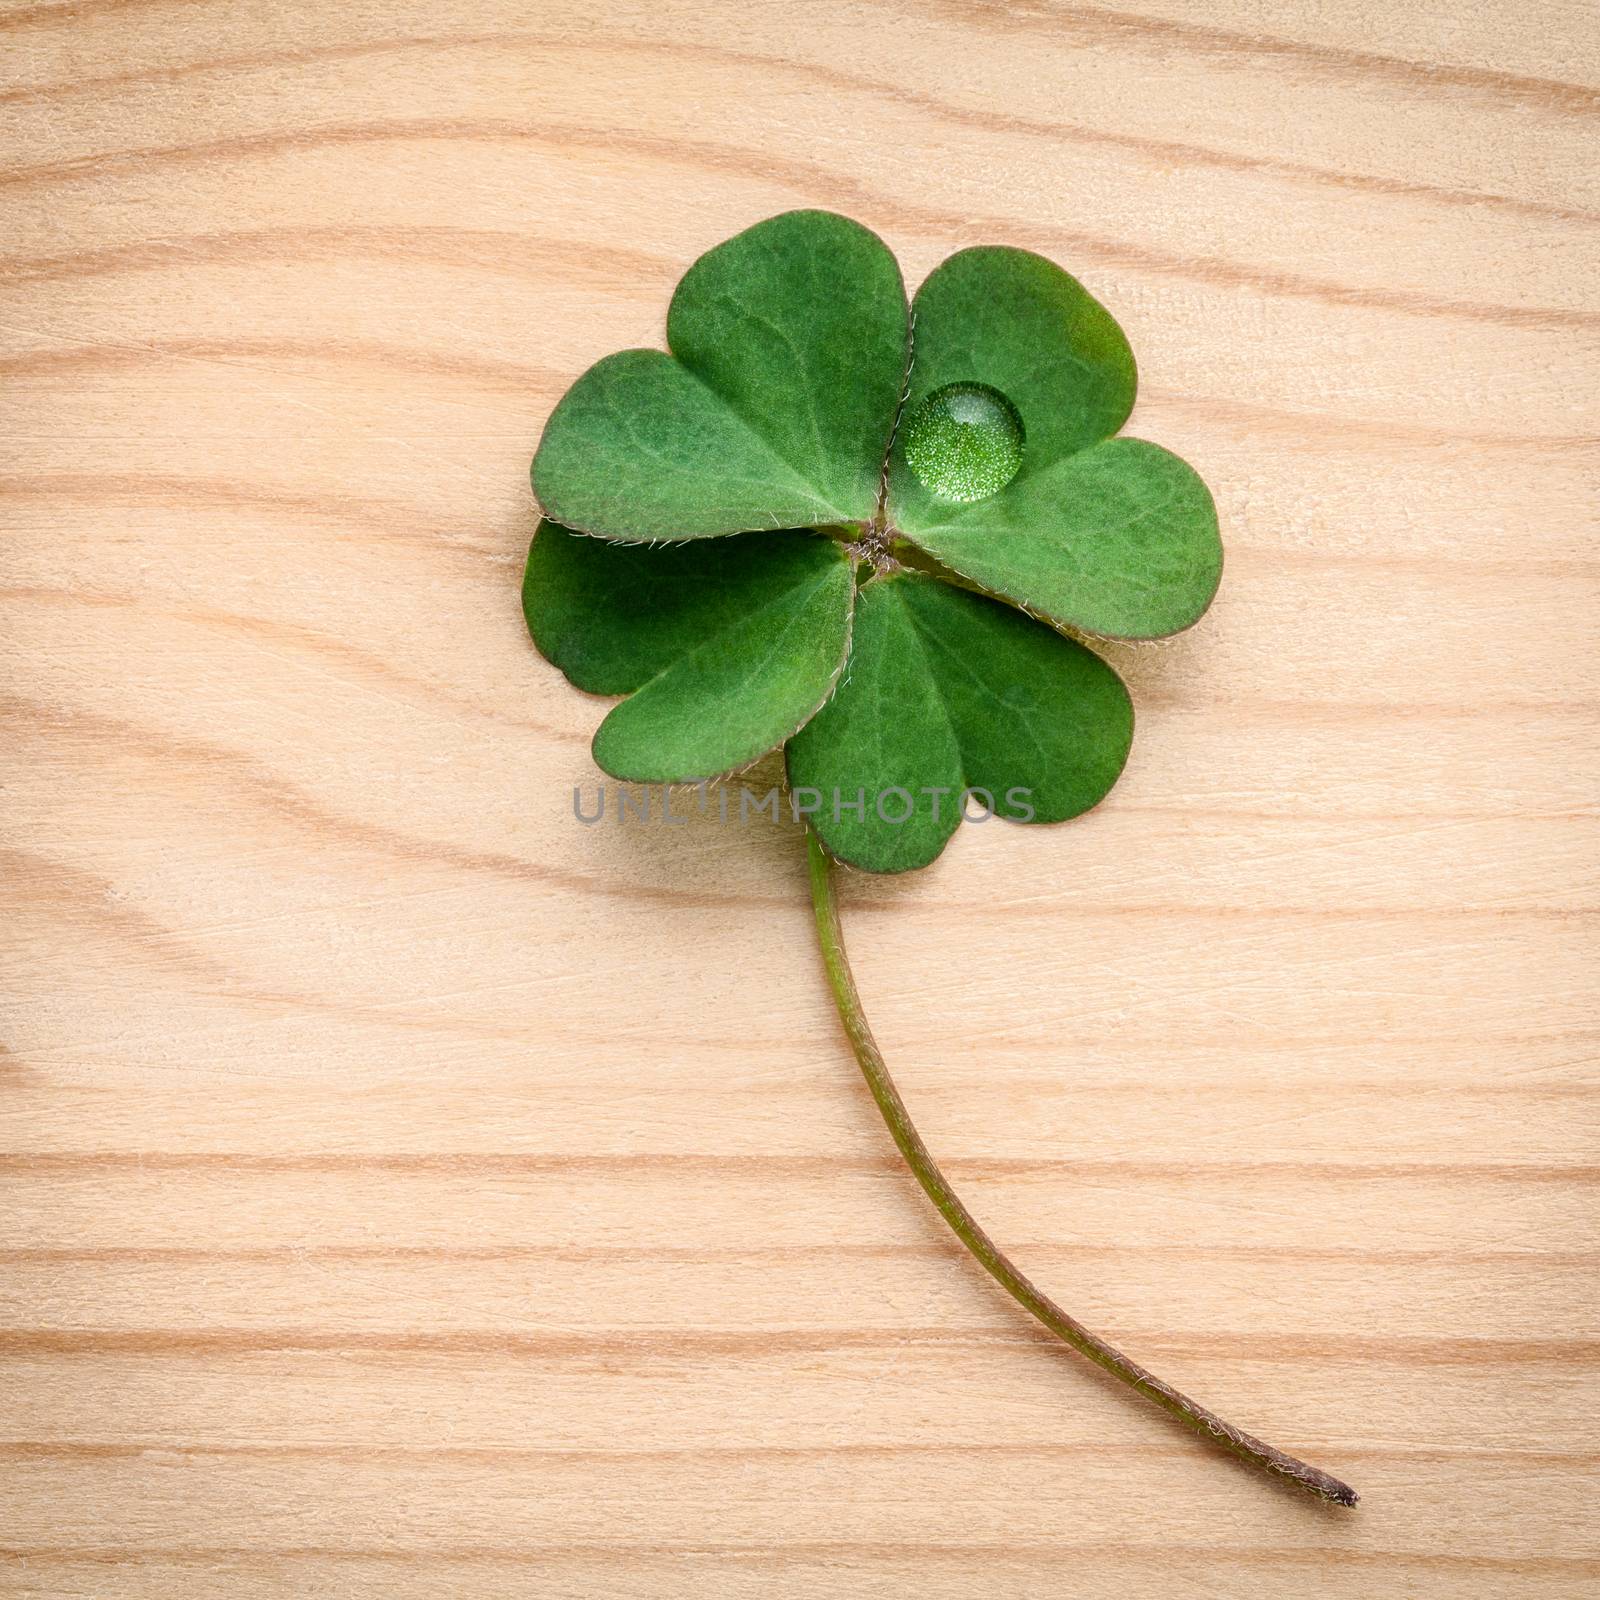 Clovers leaves on wooden background.The symbolic of Four Leaf Clover the first is for faith, the second is for hope, the third is for love, and the fourth is for luck. Shamrocks is symbolic dreams .